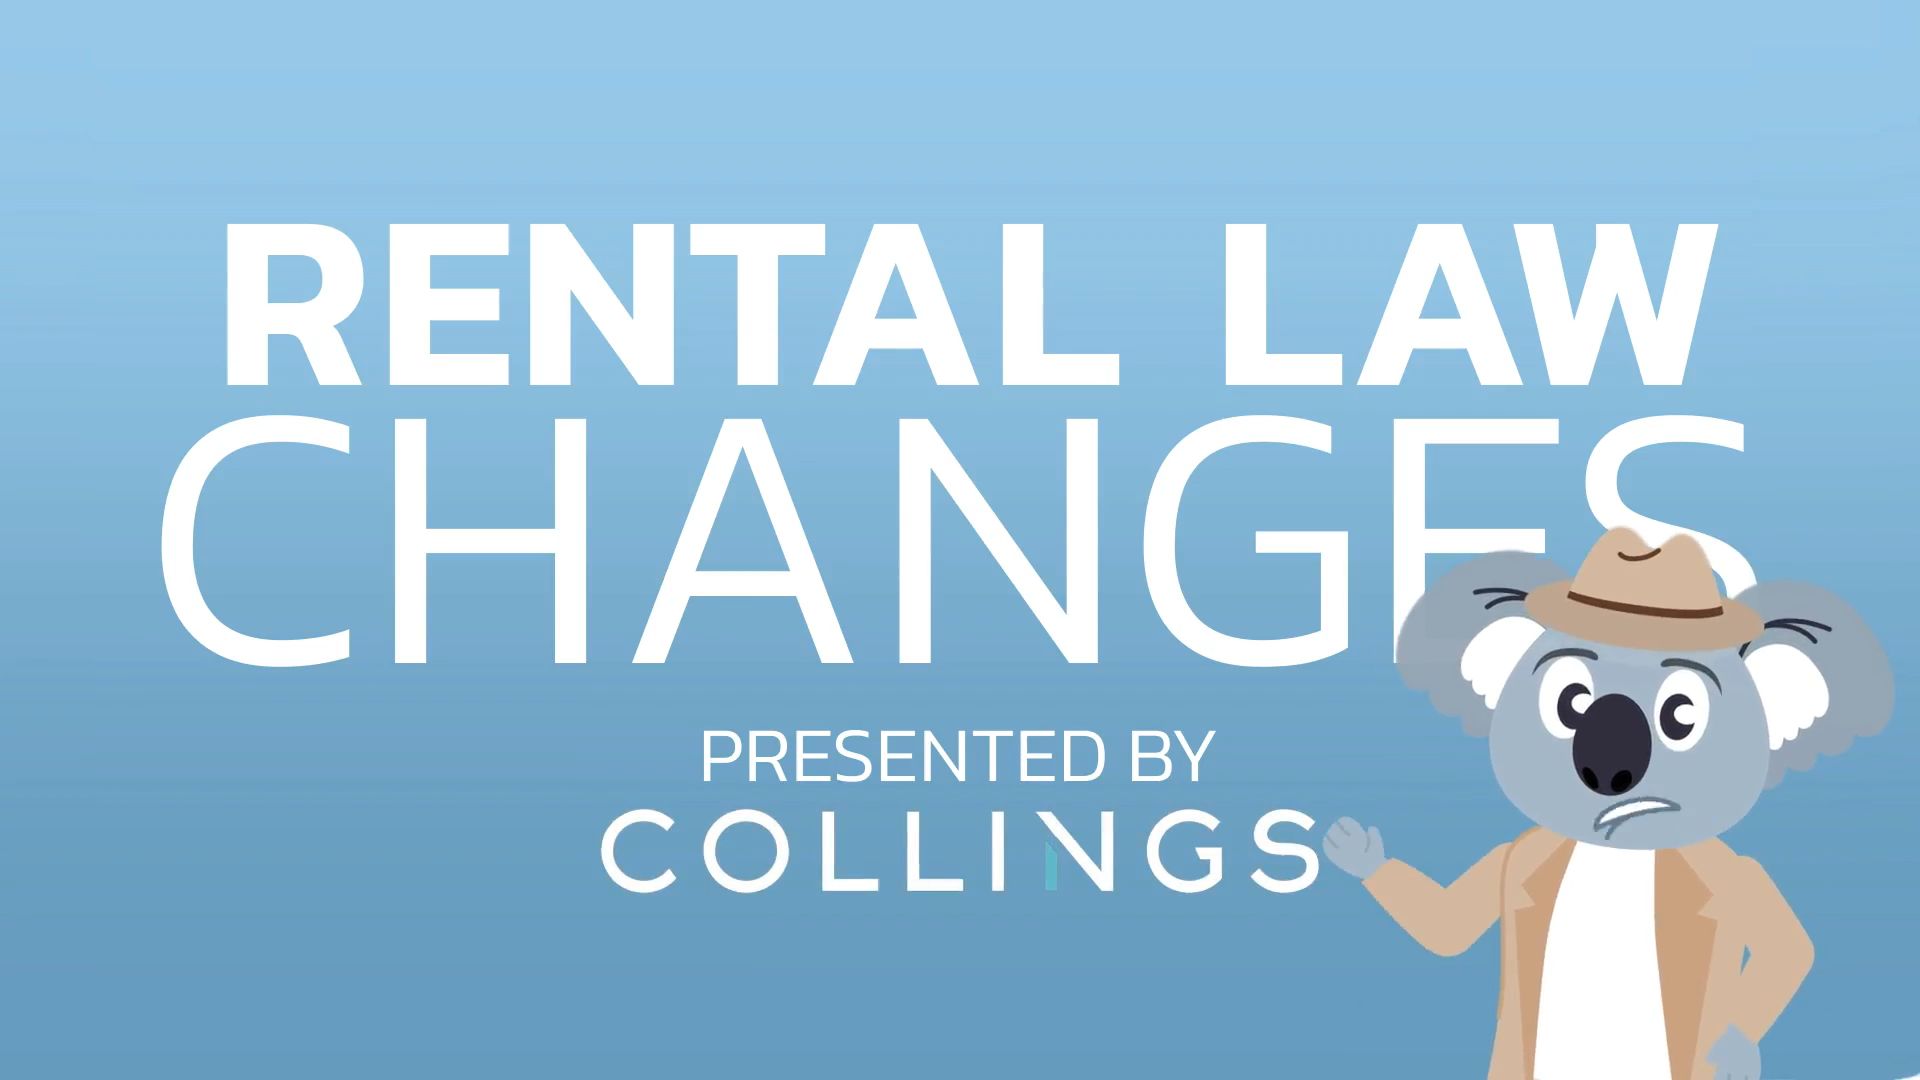 Rental Law Changes presented by Collings